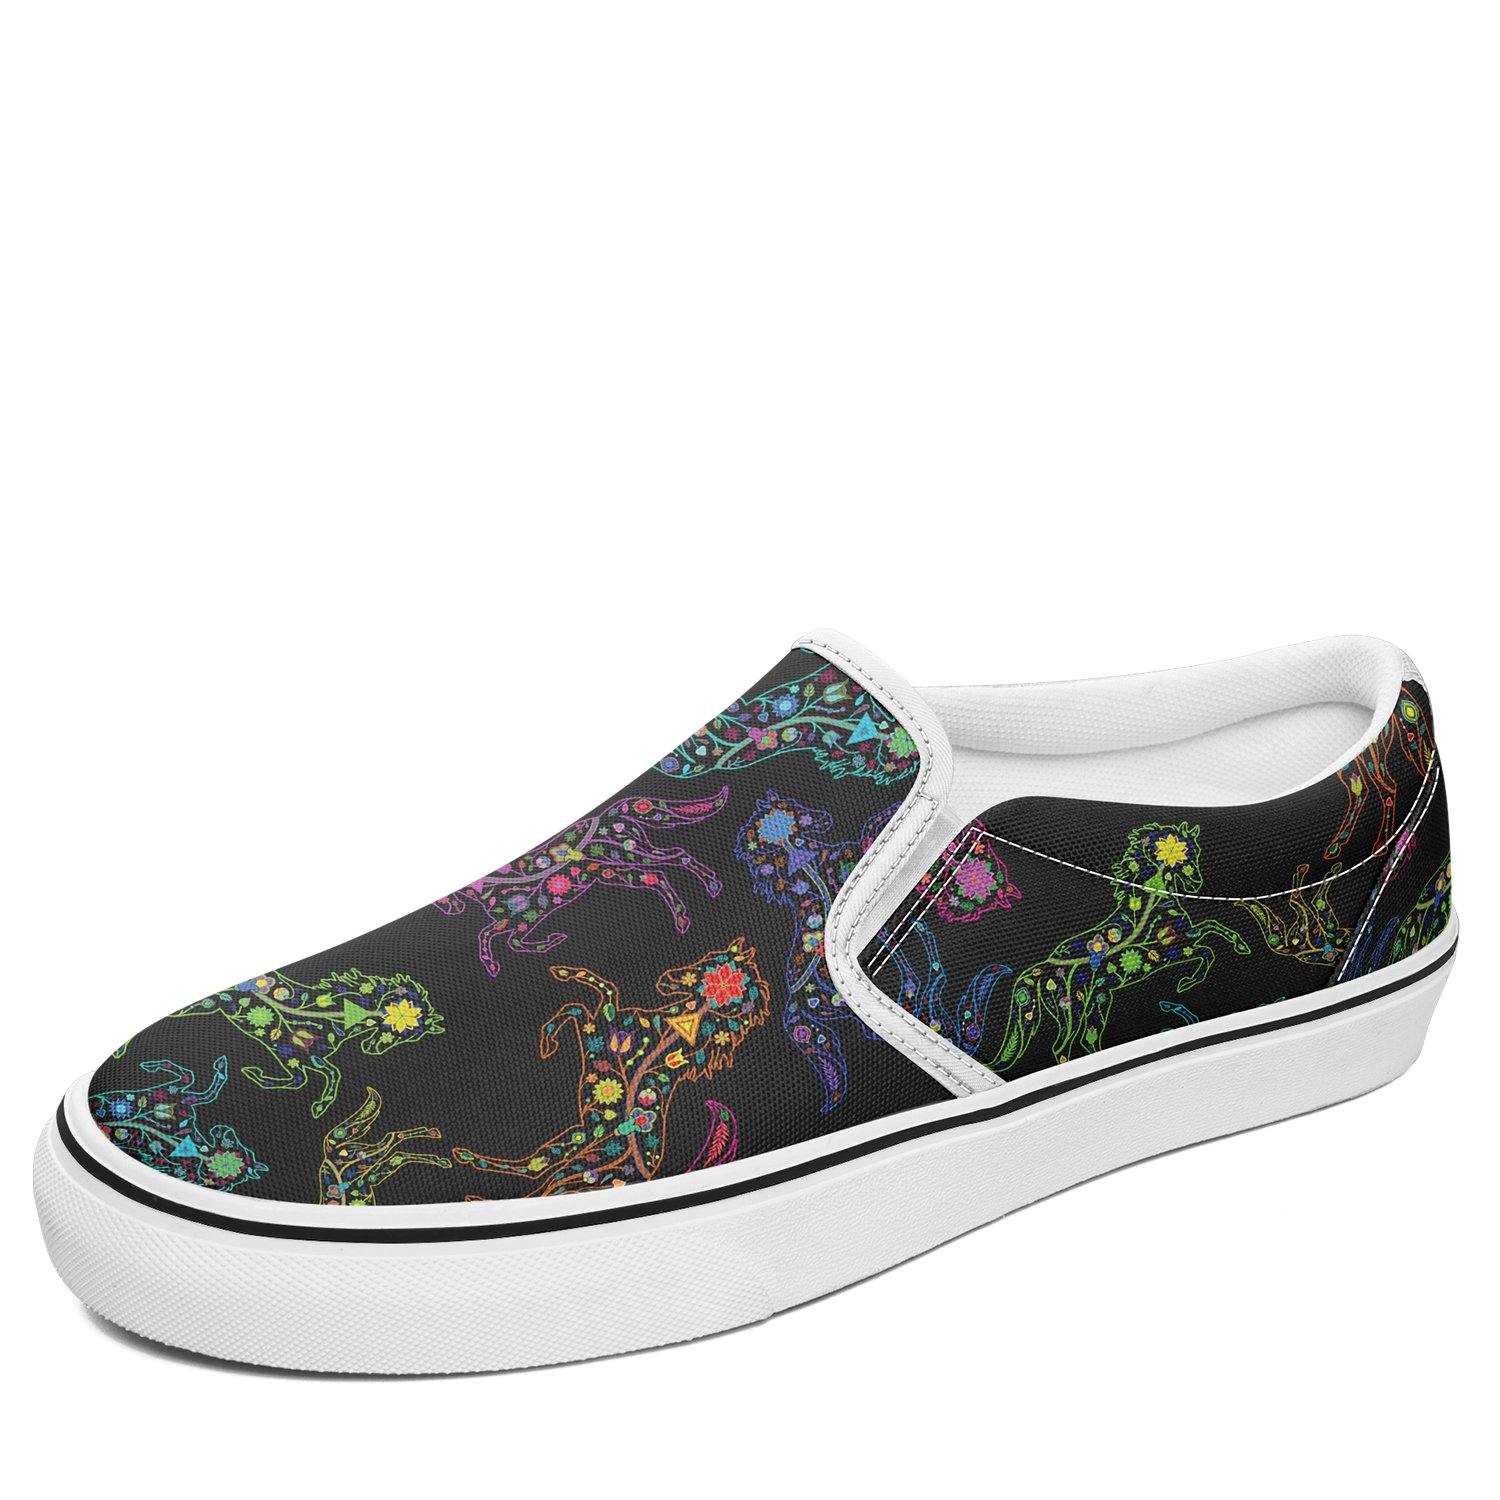 Floral Horse Otoyimm Canvas Slip On Shoes otoyimm Herman US Youth 1 / EUR 32 White Sole 